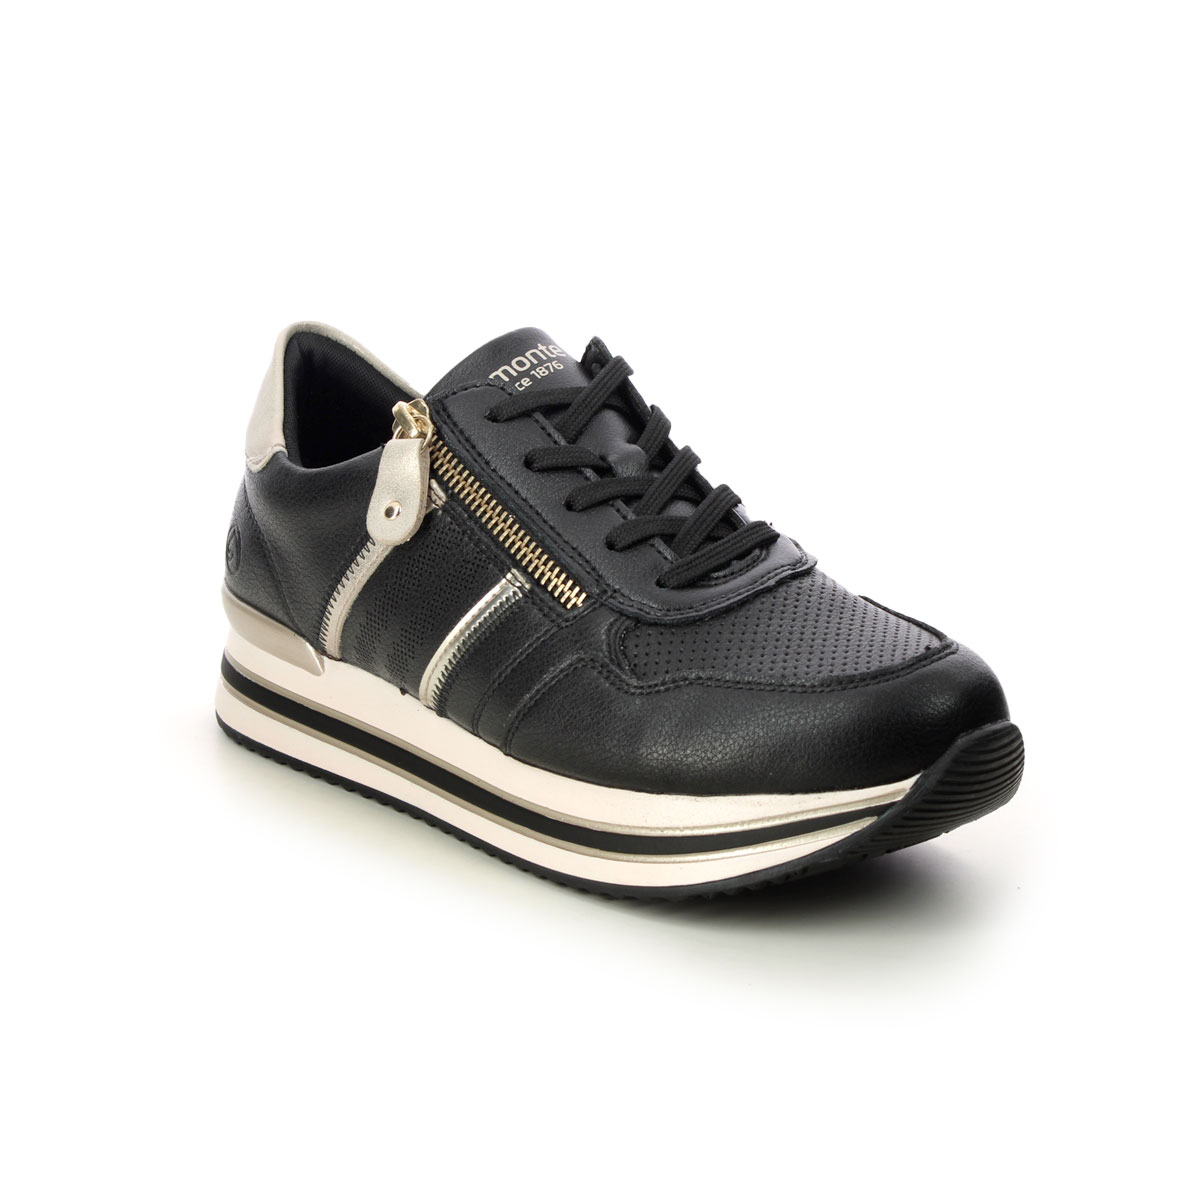 Remonte D1318-01 Range Zip Elle Black gold Womens trainers in a Plain Leather in Size 38